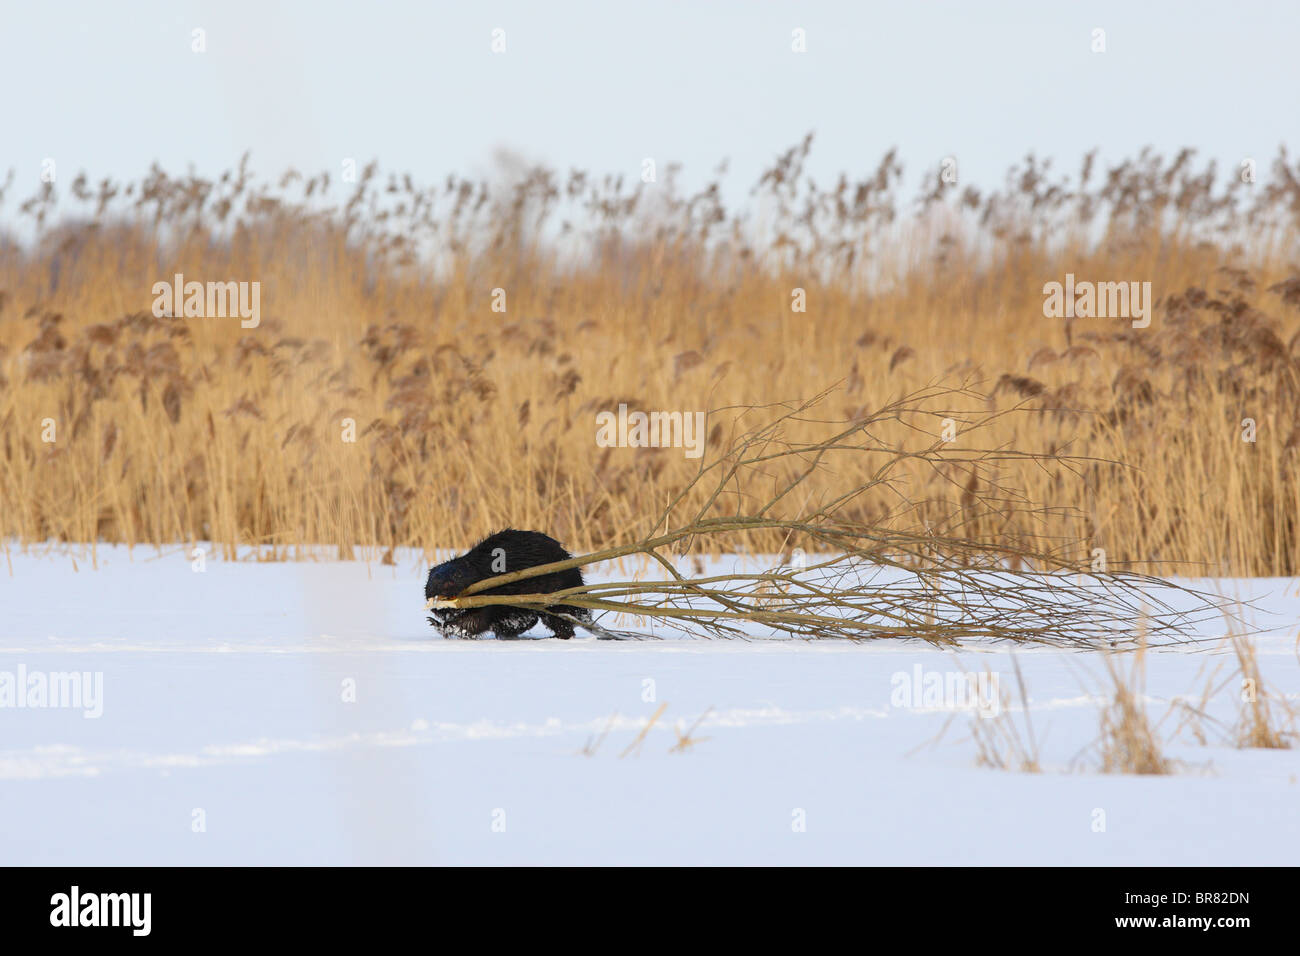 Eurasian beaver (Castor fiber) carrying food, willow branches. March Stock Photo